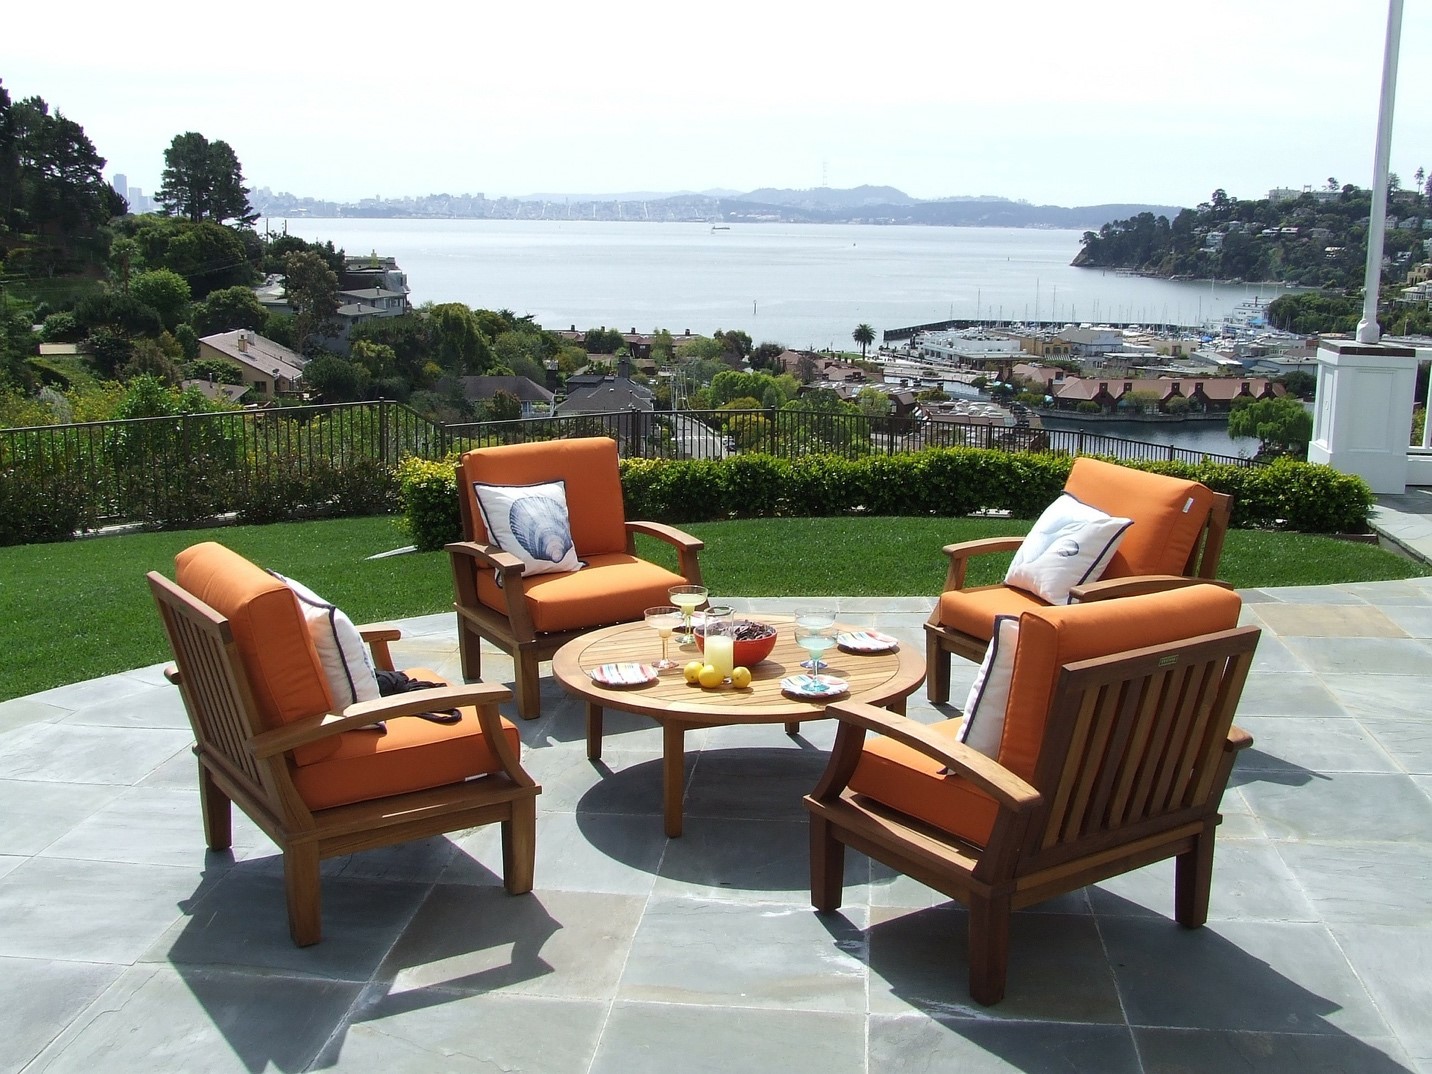 4 Ways to Decorate Your Patio for Spring